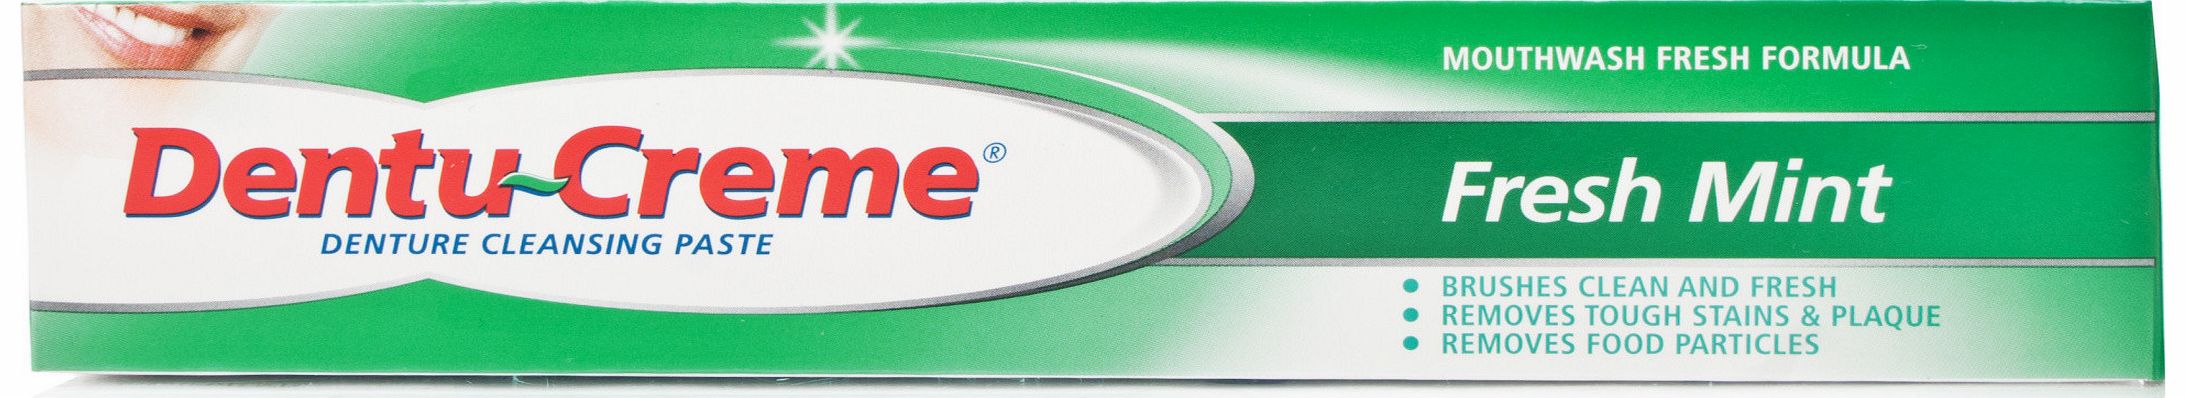 Dentu-Creme Denture Cleansing Toothpaste Fresh Mint provides a more concentrated cleaning routine due to the manual brushing activity which removes bacterial plaque and tough stains, to leave dentures really clean. It contains minty mouthwash ingredi